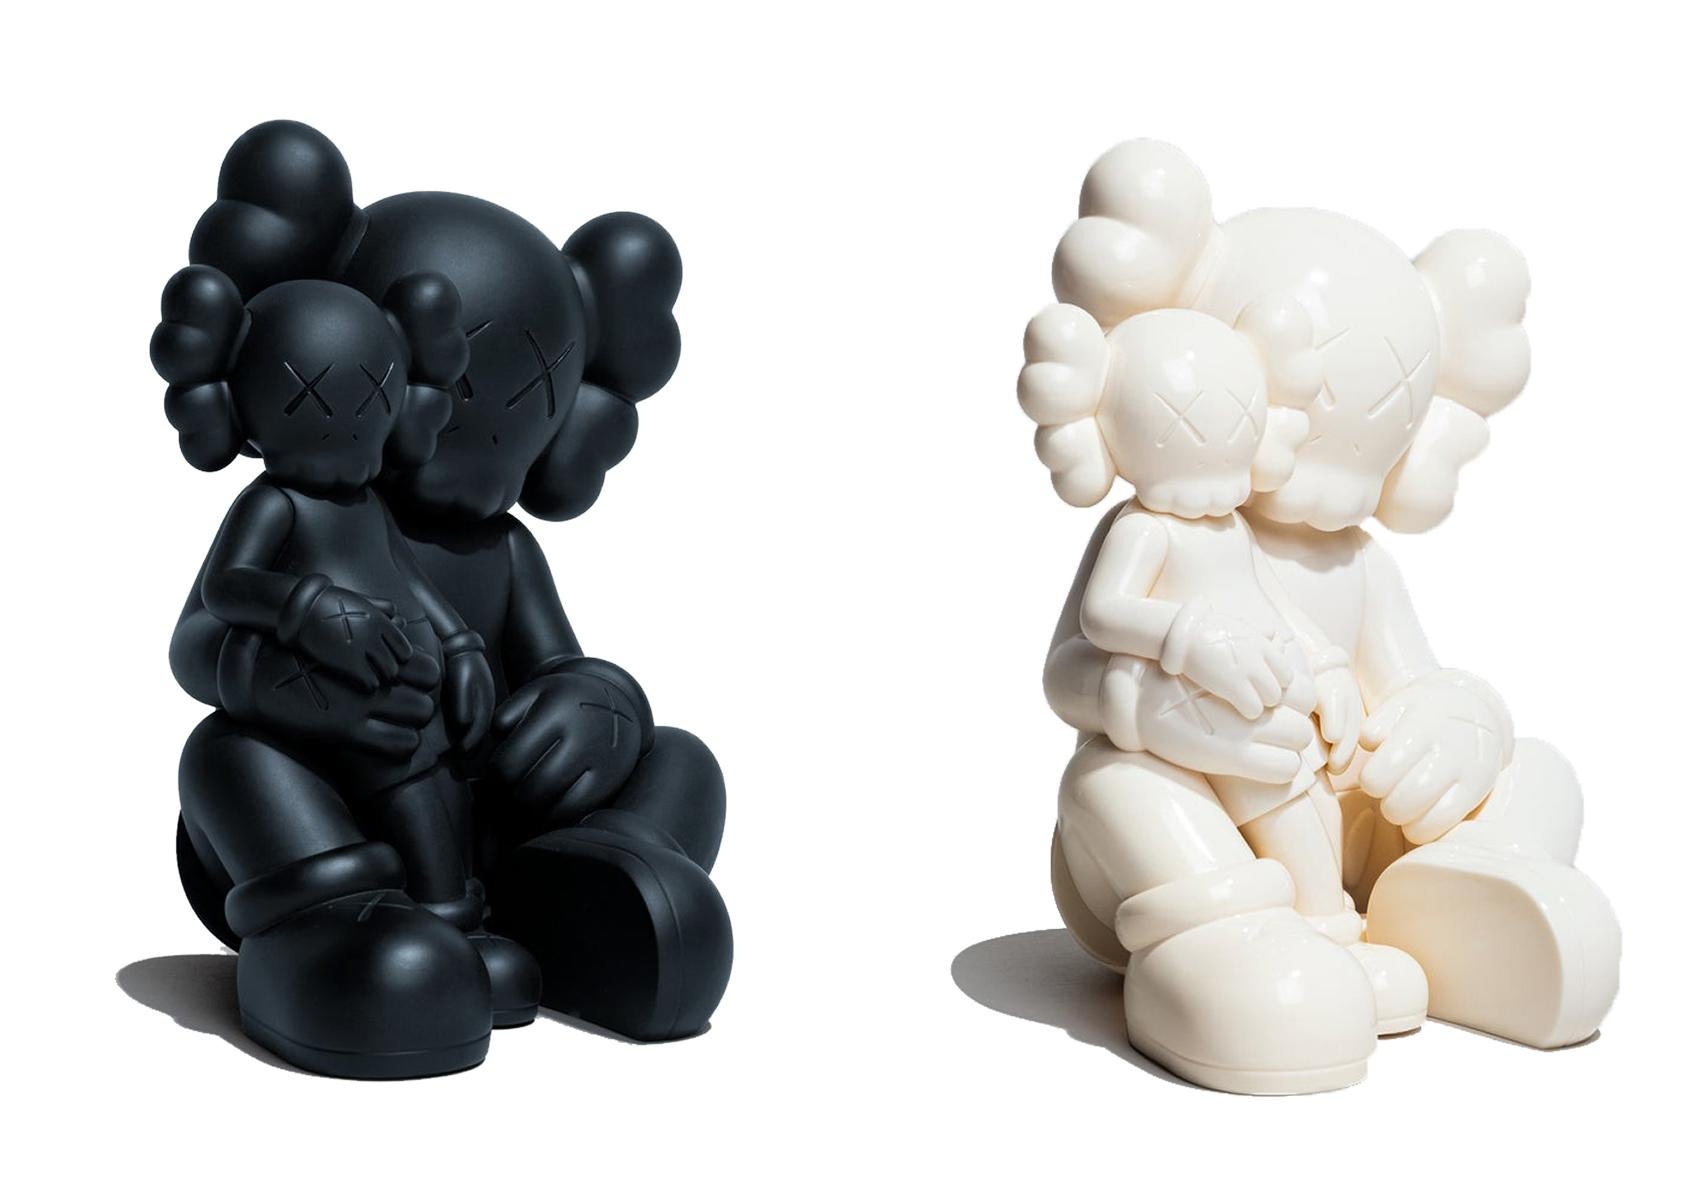 KAWS Holiday Changbai Mountain: set of 2 works (Black & White Changbai):
A beautifully composed KAWS COMPANION set published to commemorate KAWS' larger-scale sculpture of same, at Changbai Mountain in Jilin Province, China. These two pieces feature